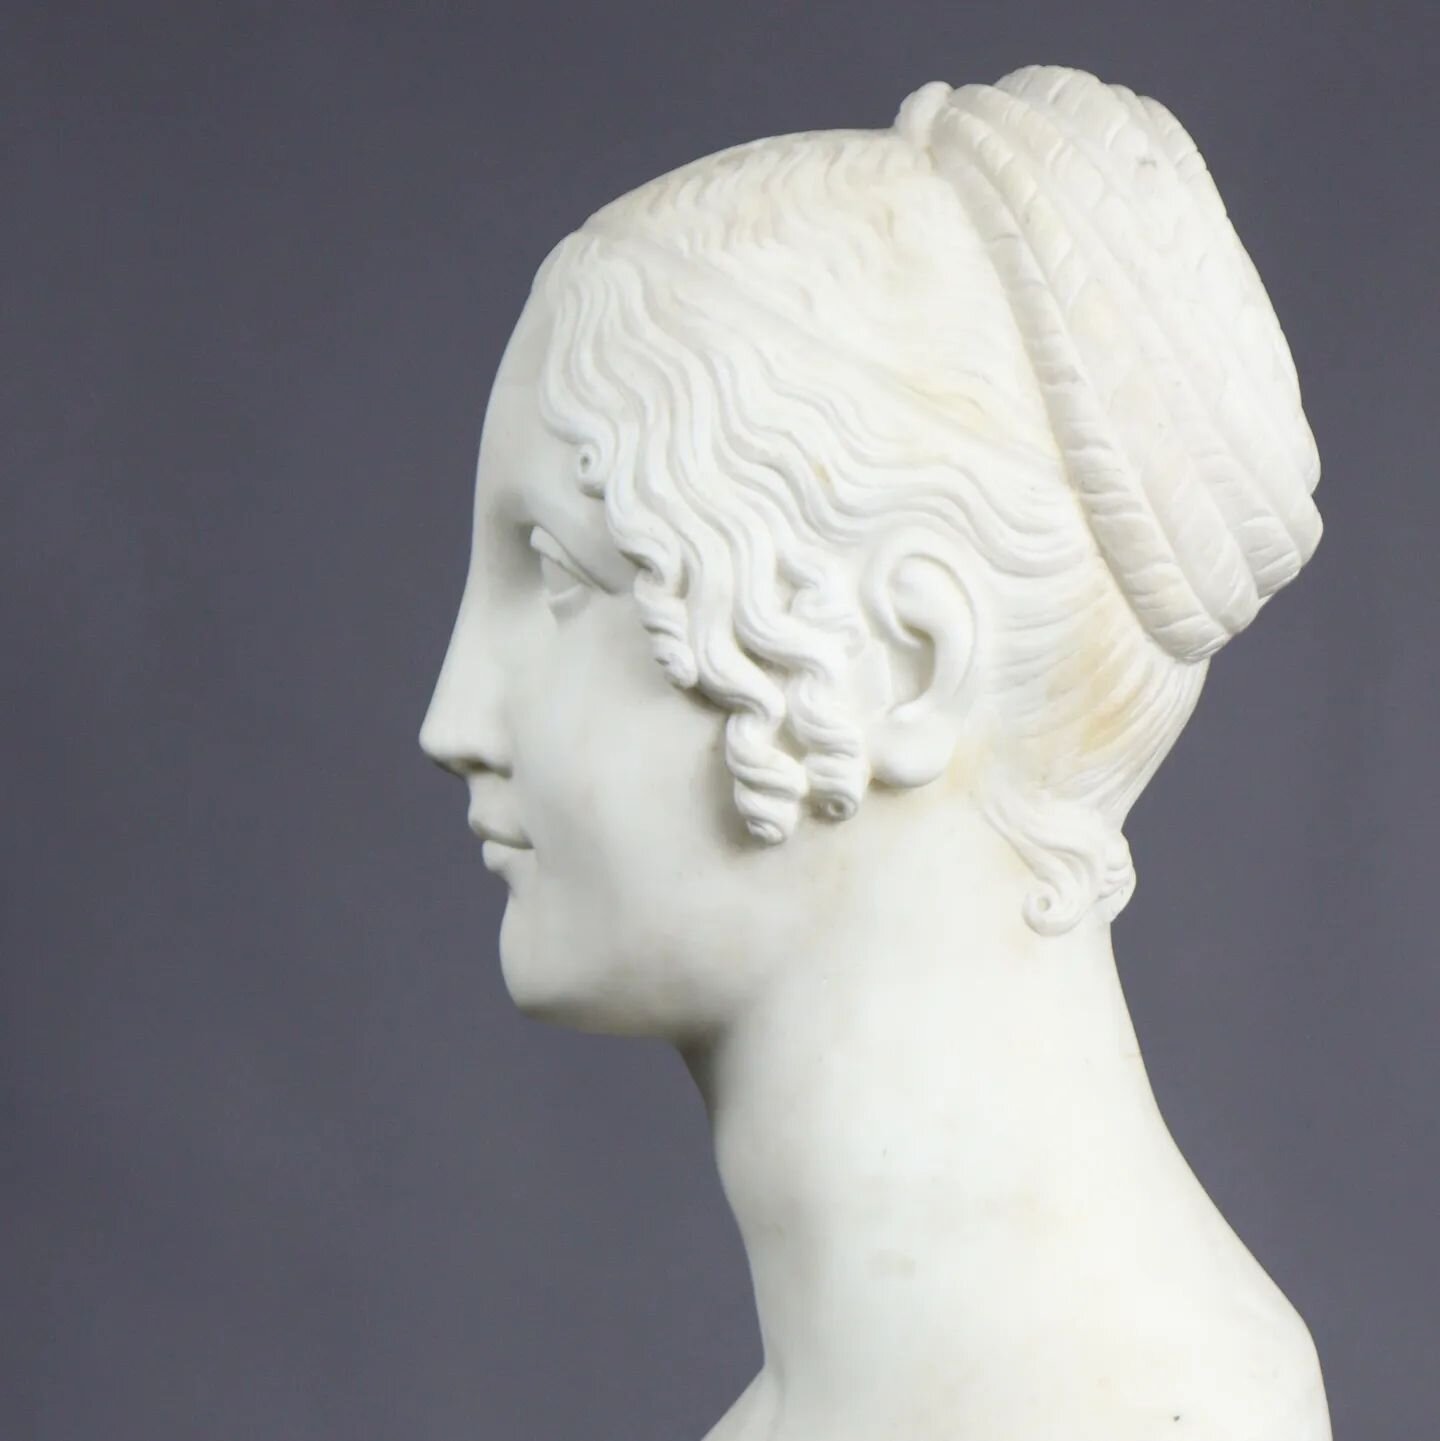 .
A late 19th century white marble bust of Laura, after Antonio Canova

Included in our 26th March Fine Art &amp; Antiques Sale 

Catalogue online next week

.

.

.

.

.

.

.

.

.

.

#fineart #antiques #interiors #interiordesign #countryhouse #c